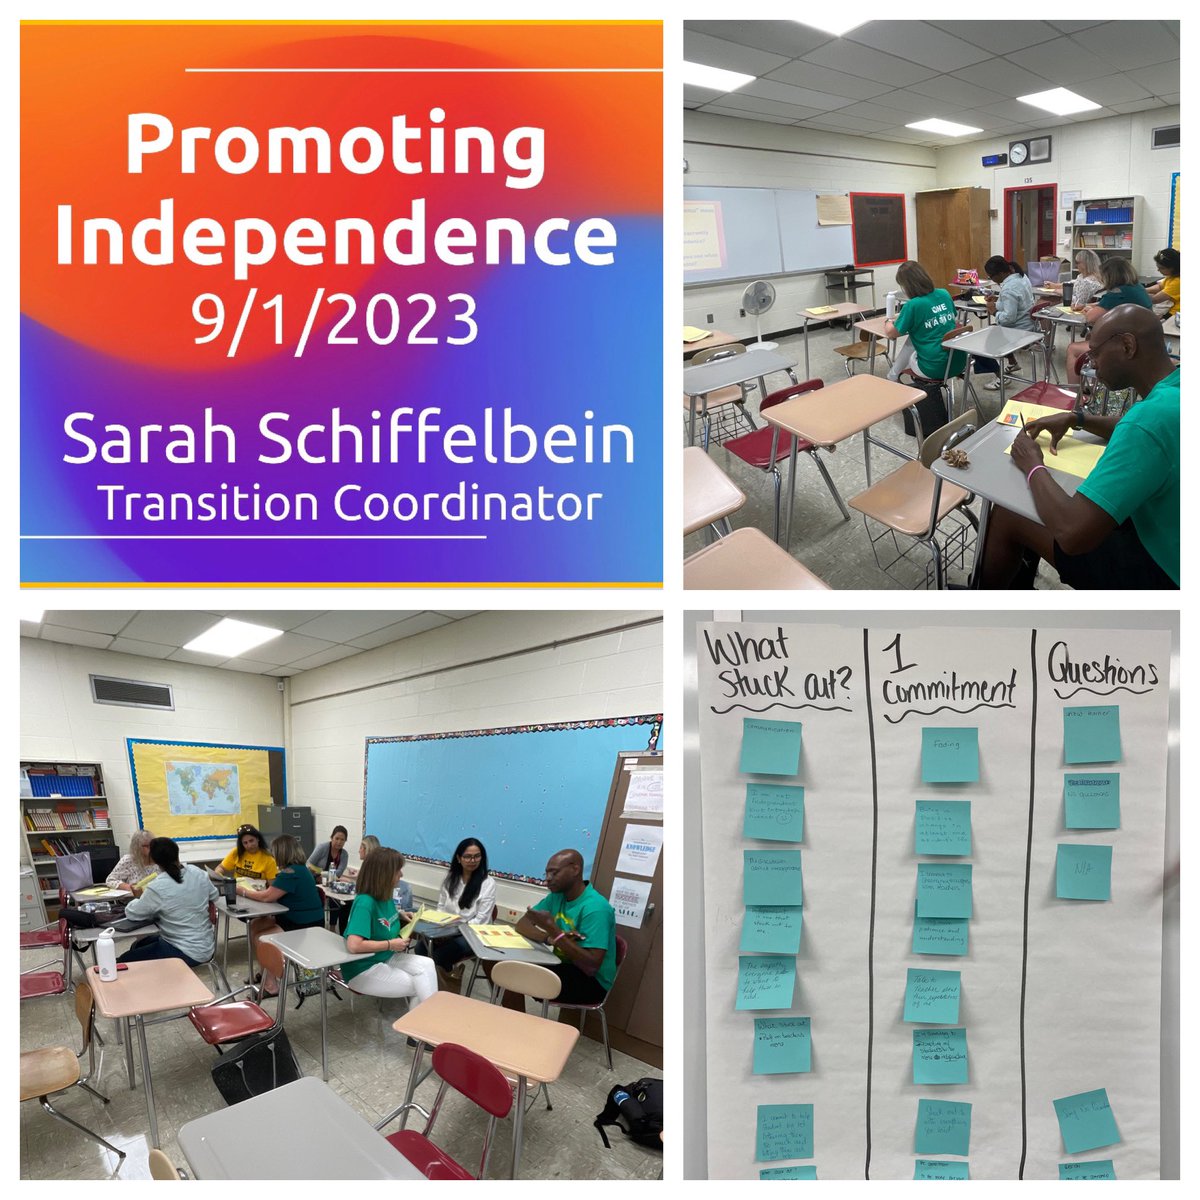 Had such a wonderful time presenting PD this morning! It was filled with great discussions about supporting and promoting student independence! Looking forward to an AWESOME school year!! @Mrs_Sasse_LTPS @dadamltps @LTPS1 @robyn_klim